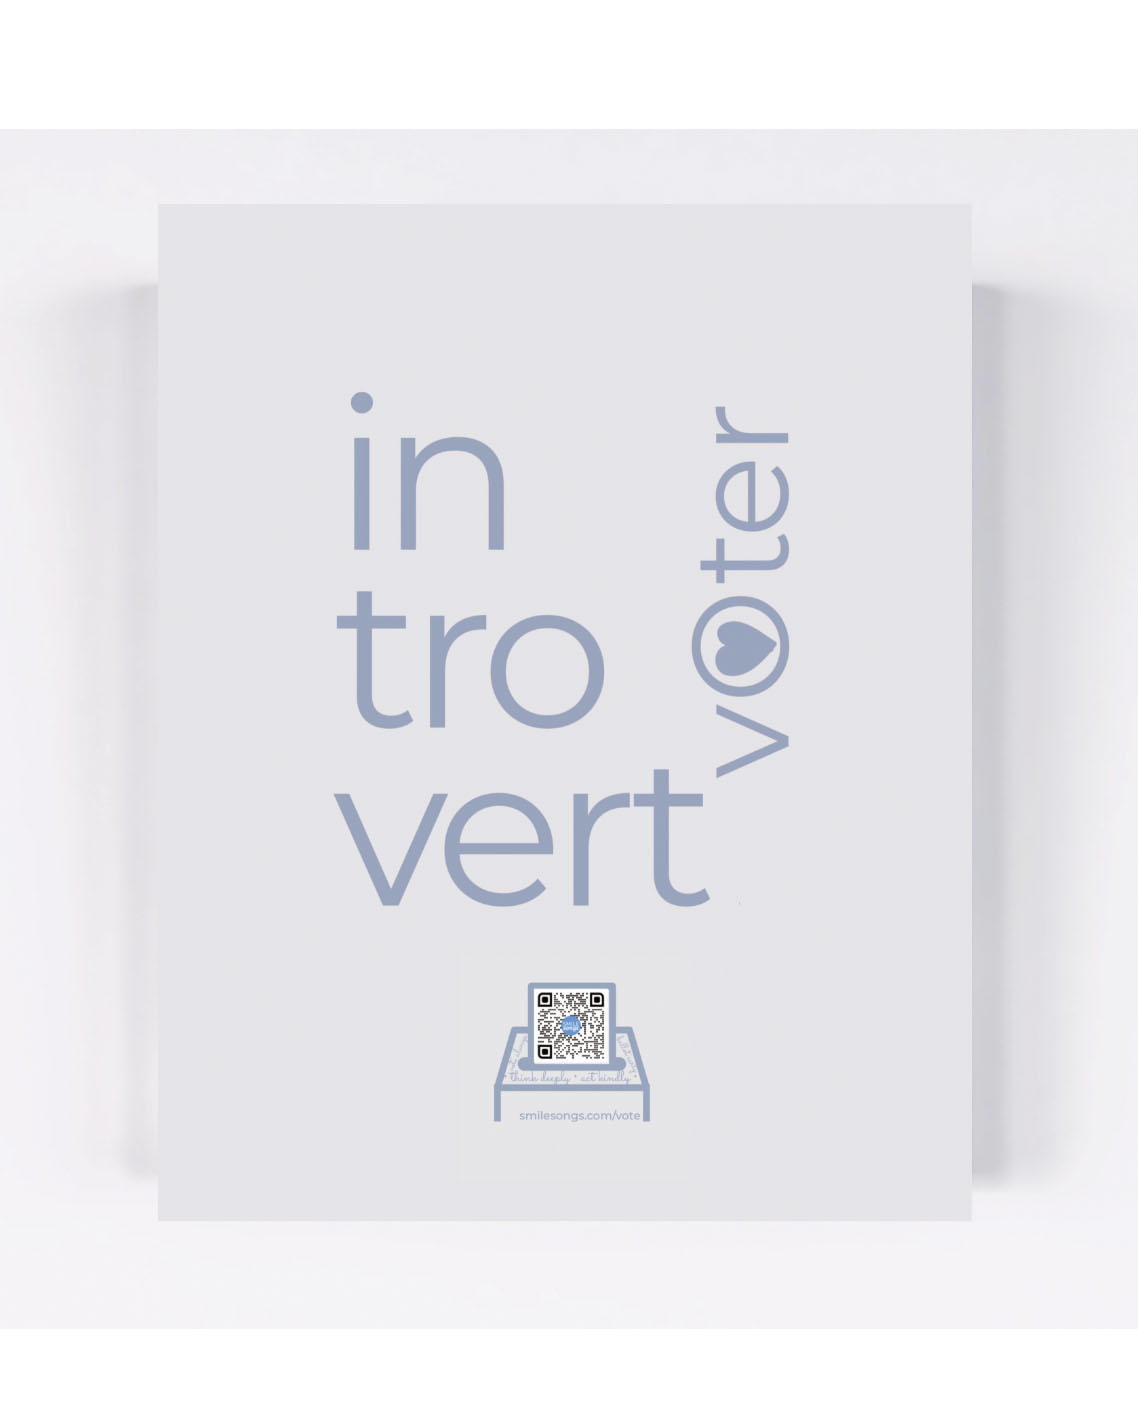 Introvert Voter Art Print with QR Code that links to song